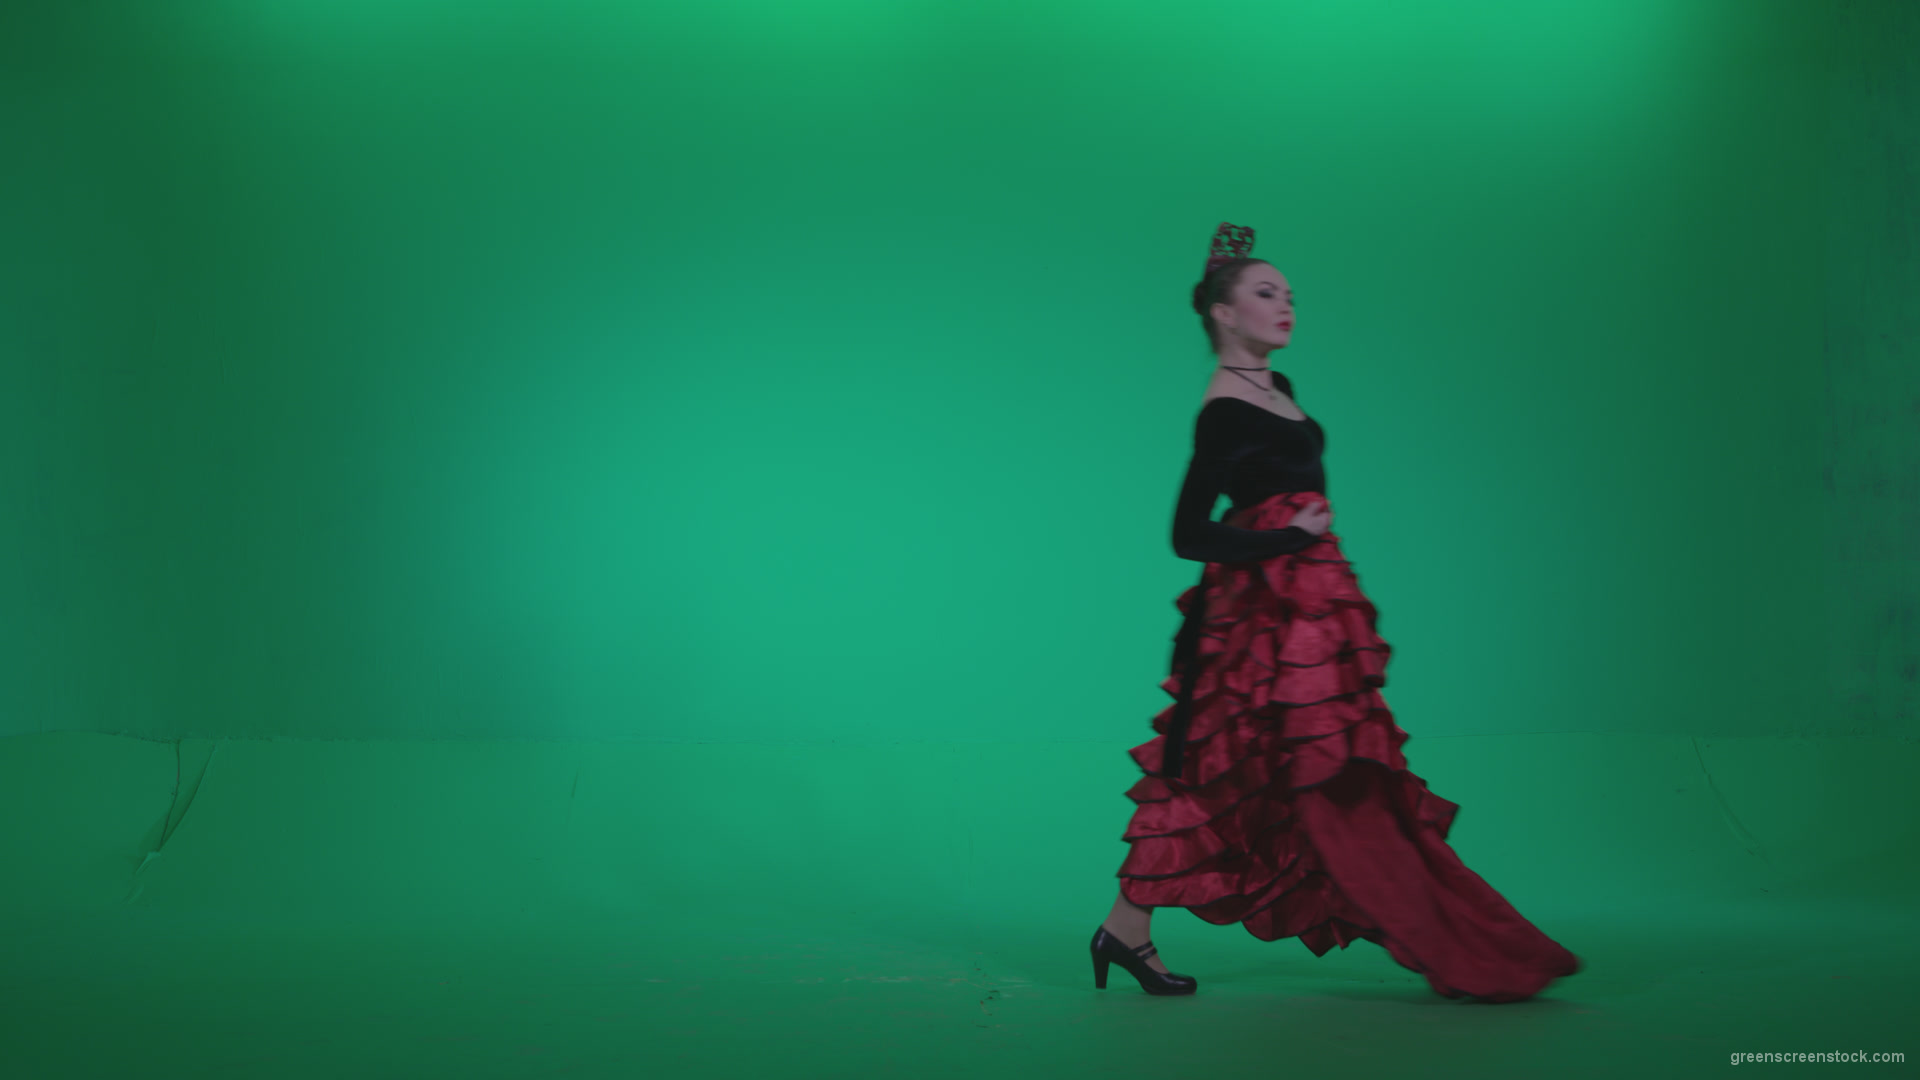 Flamenco-Red-and-Black-Dress-rb7-Green-Screen-Video-Footage_009 Green Screen Stock